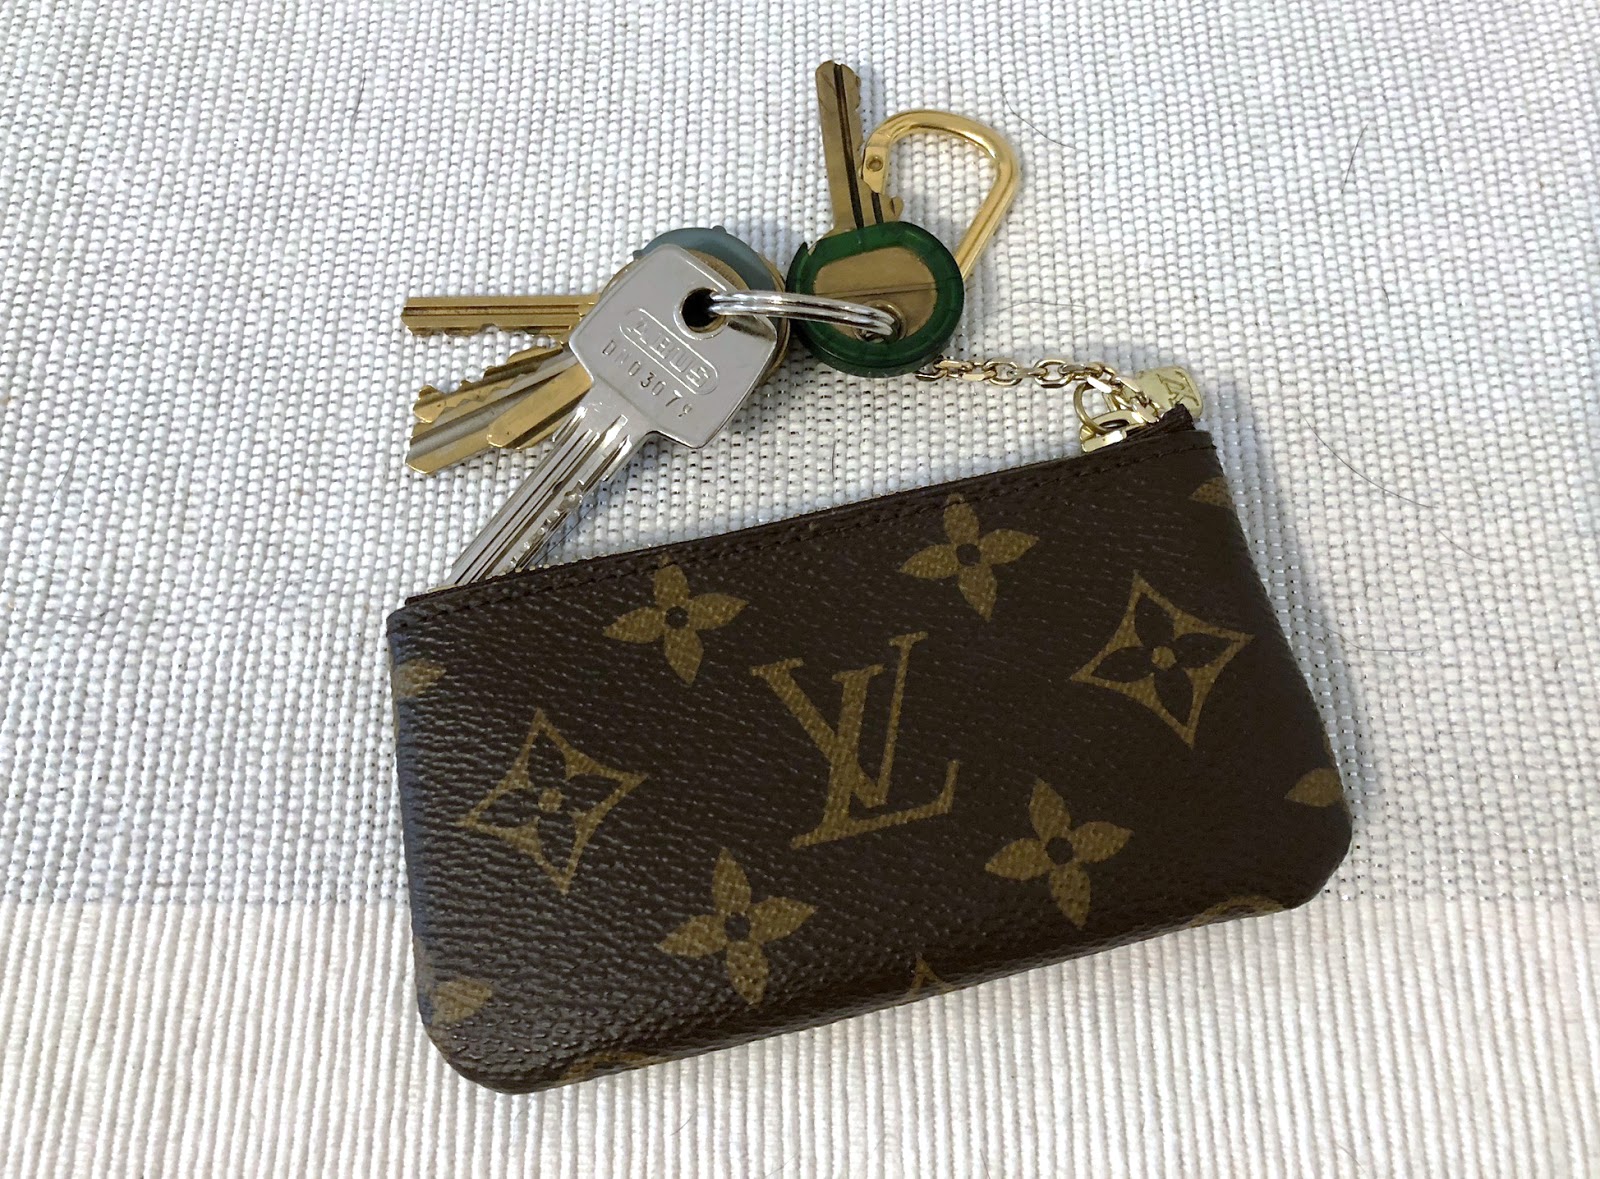 Louis Vuitton SLG & Accessories Collection - March 2016 